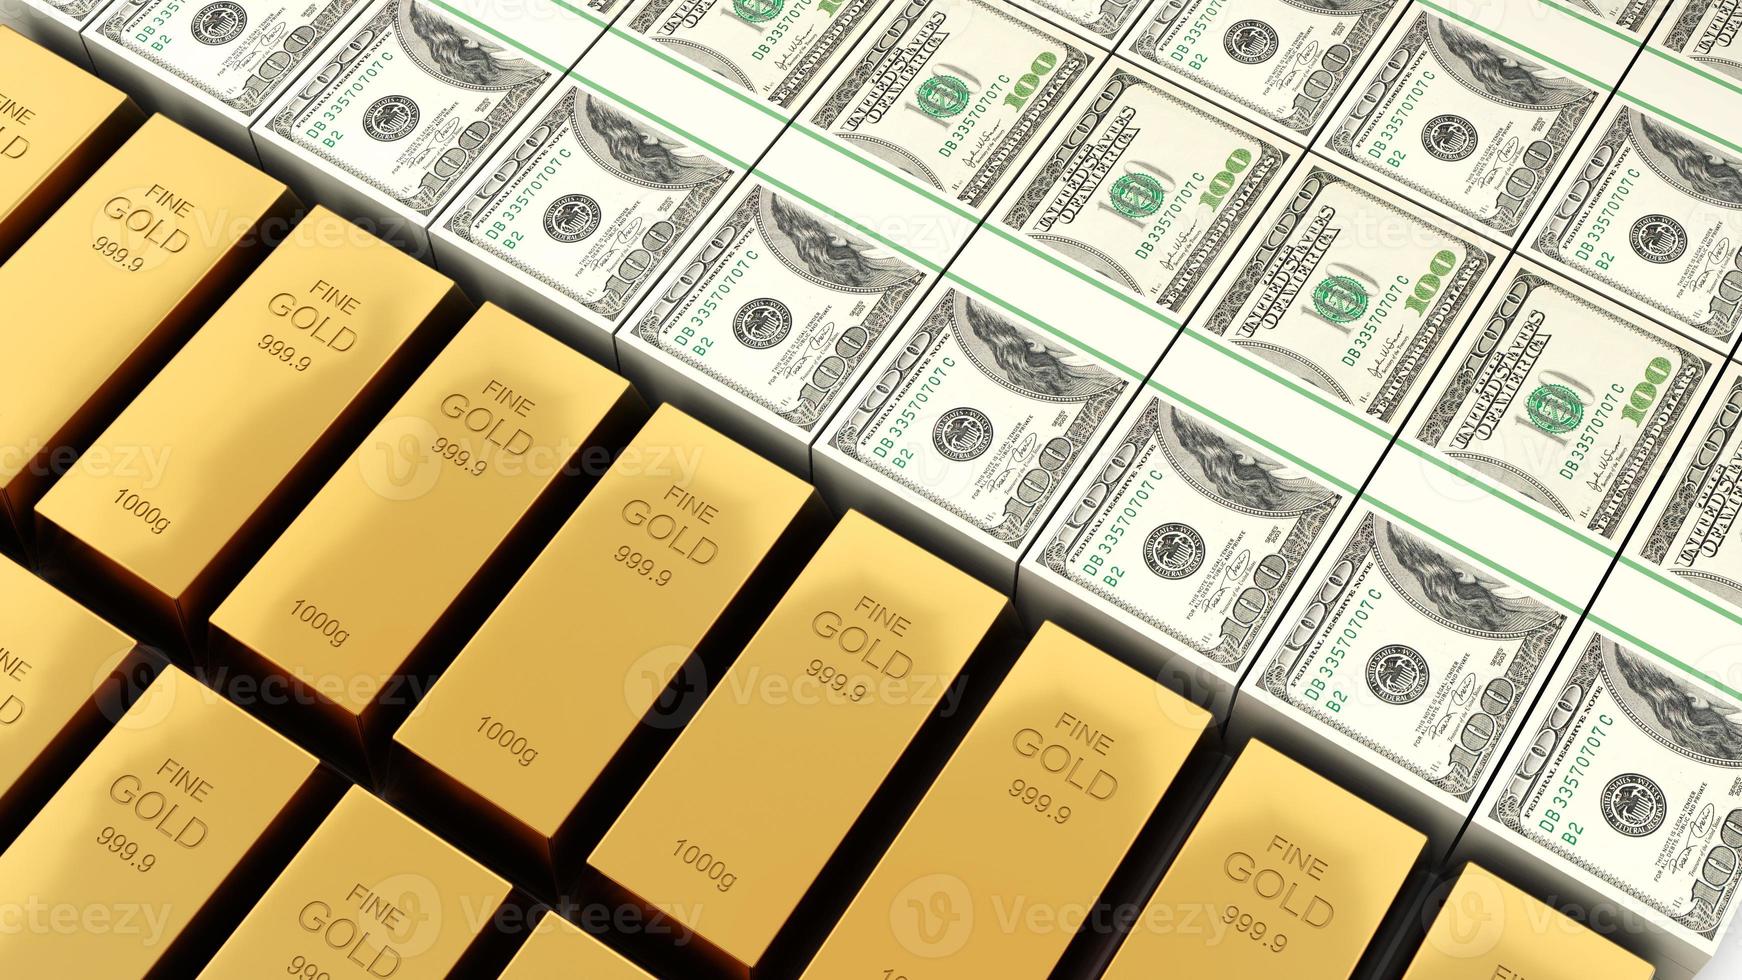 US Dollars and Commodities Gold,gold vs cash comparison,investment economy,3d rendering photo